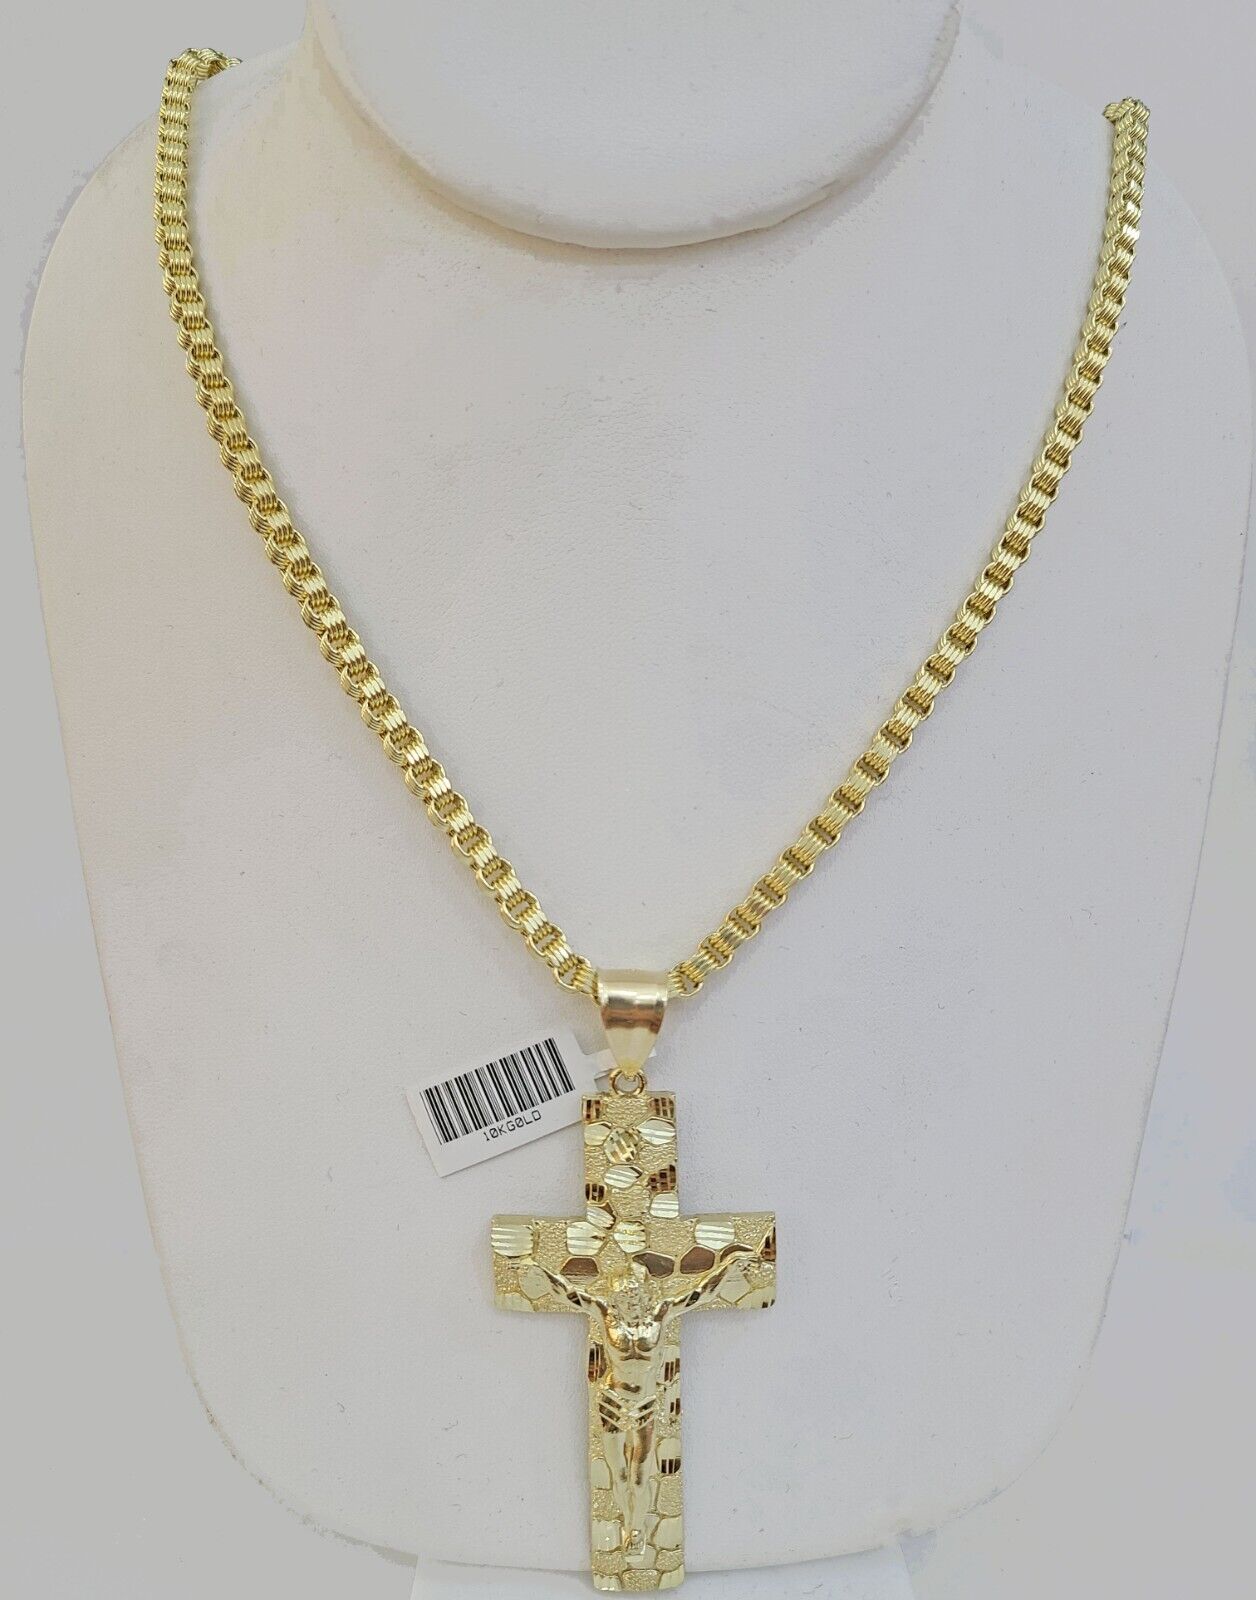 Real 10k Gold Nugget Cross Byzantine Chain Necklace 4mm 24" Chain Charm SET 10kt